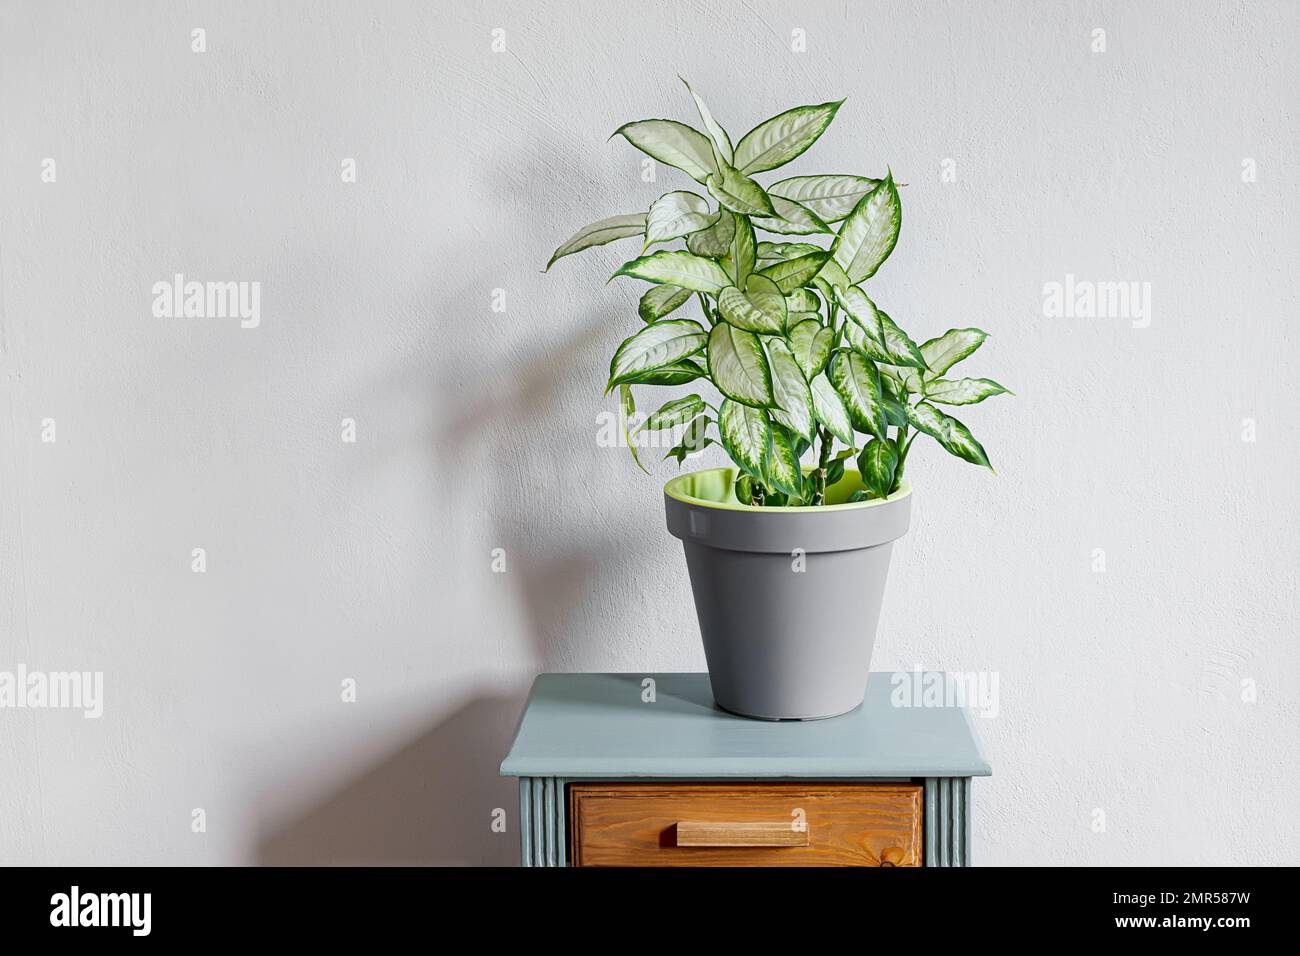 Dieffenbachia or Dumb cane plant in a gray flower pot on a gray table in daylight room, home gardening and connecting with nature Stock Photo